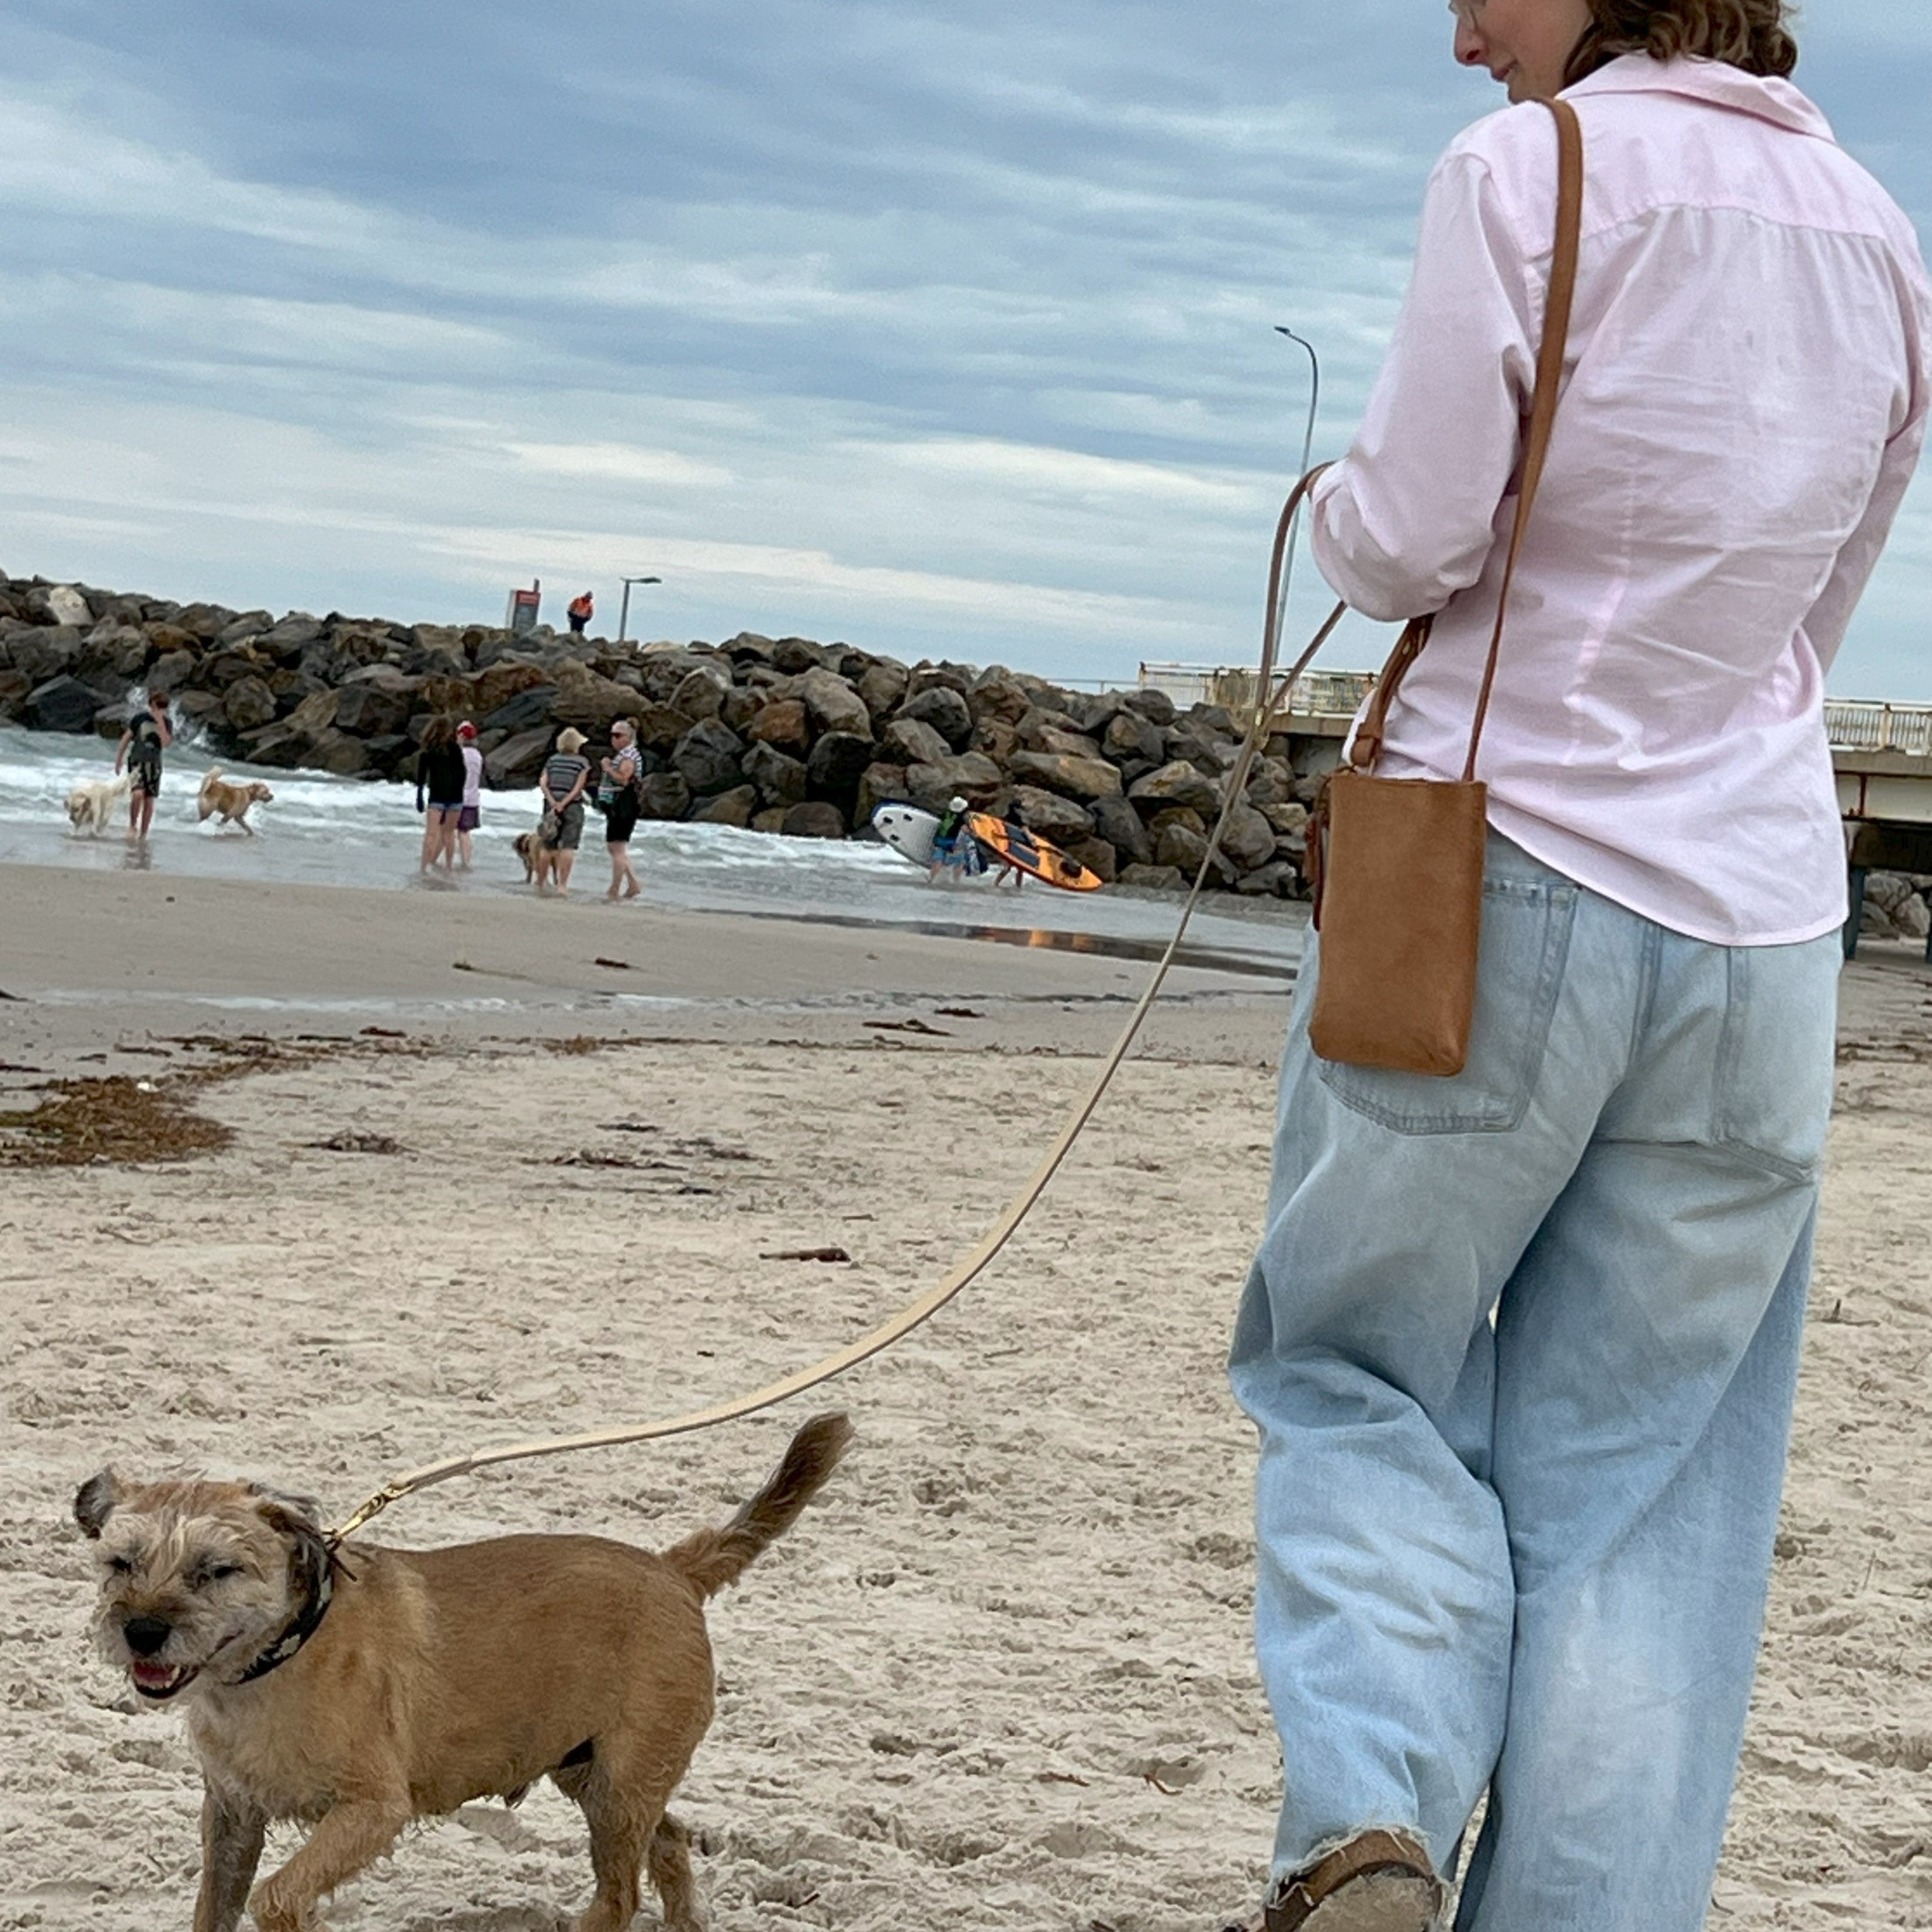 A woman in a pink shirt and blue jeans holds a Georgie Paws Bald Lead Chalk handle leash with a happy brown dog on a sandy beach, where people gather near the water and rocky pier, with a small.